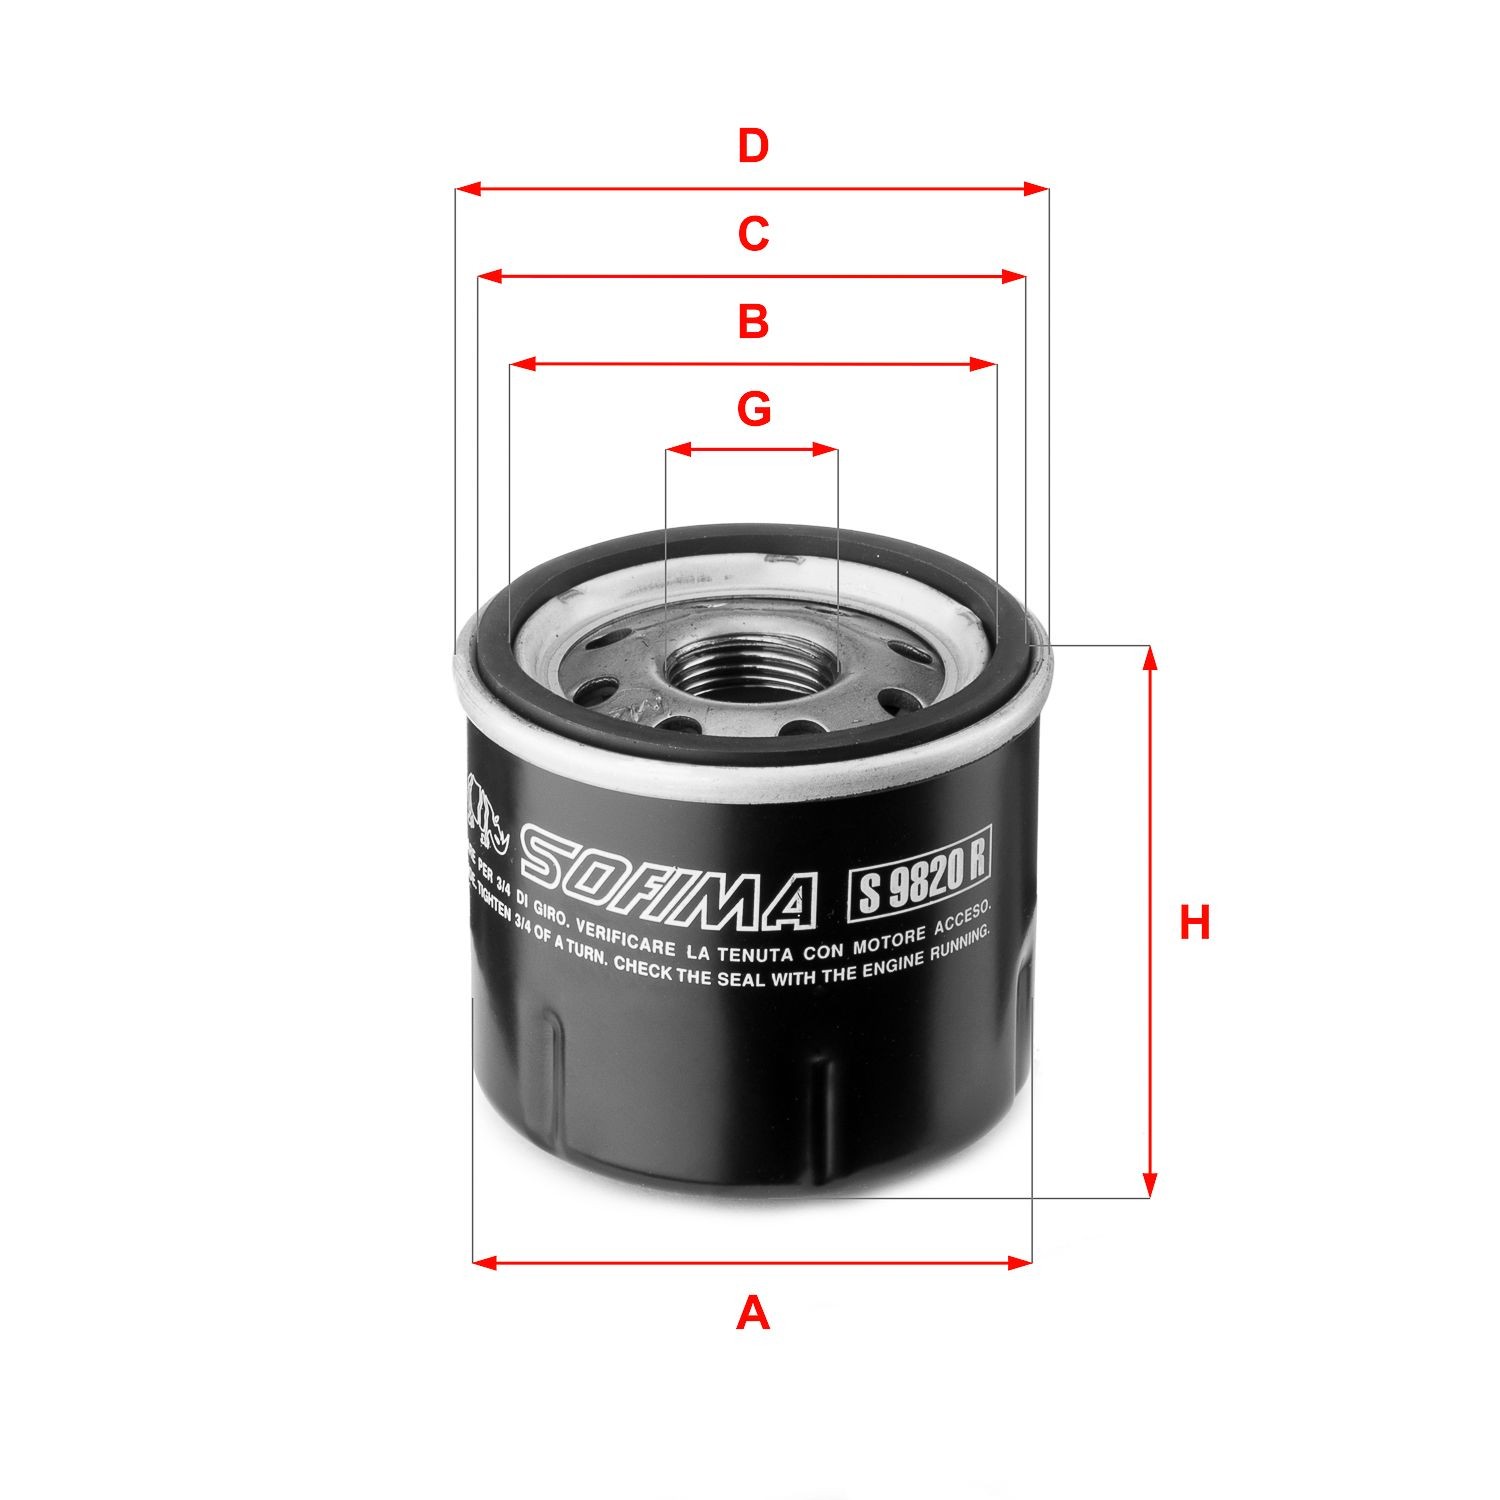 SOFIMA M 20 X 1,5, Spin-on Filter Inner Diameter 2: 55mm, Outer Diameter 2: 63mm, Ø: 66, 69,5mm, Height: 61mm Oil filters S 9820 R buy